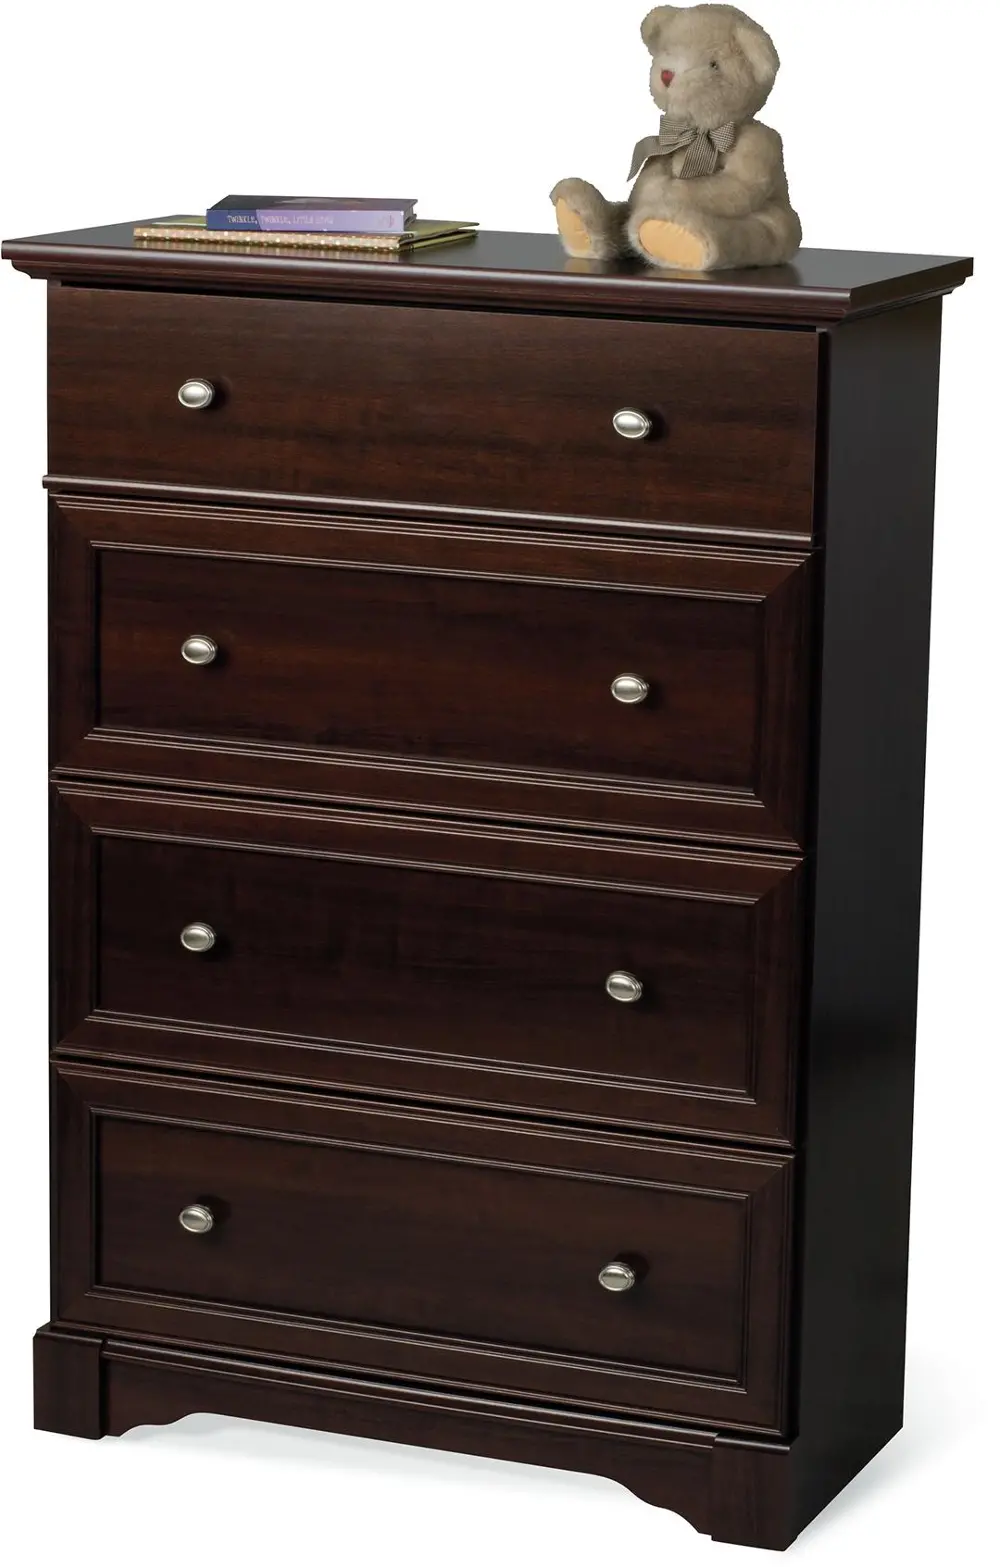 F01302.85/4DRWRCHEST Cherry 4-Drawer Chest  - Updated Classic-1